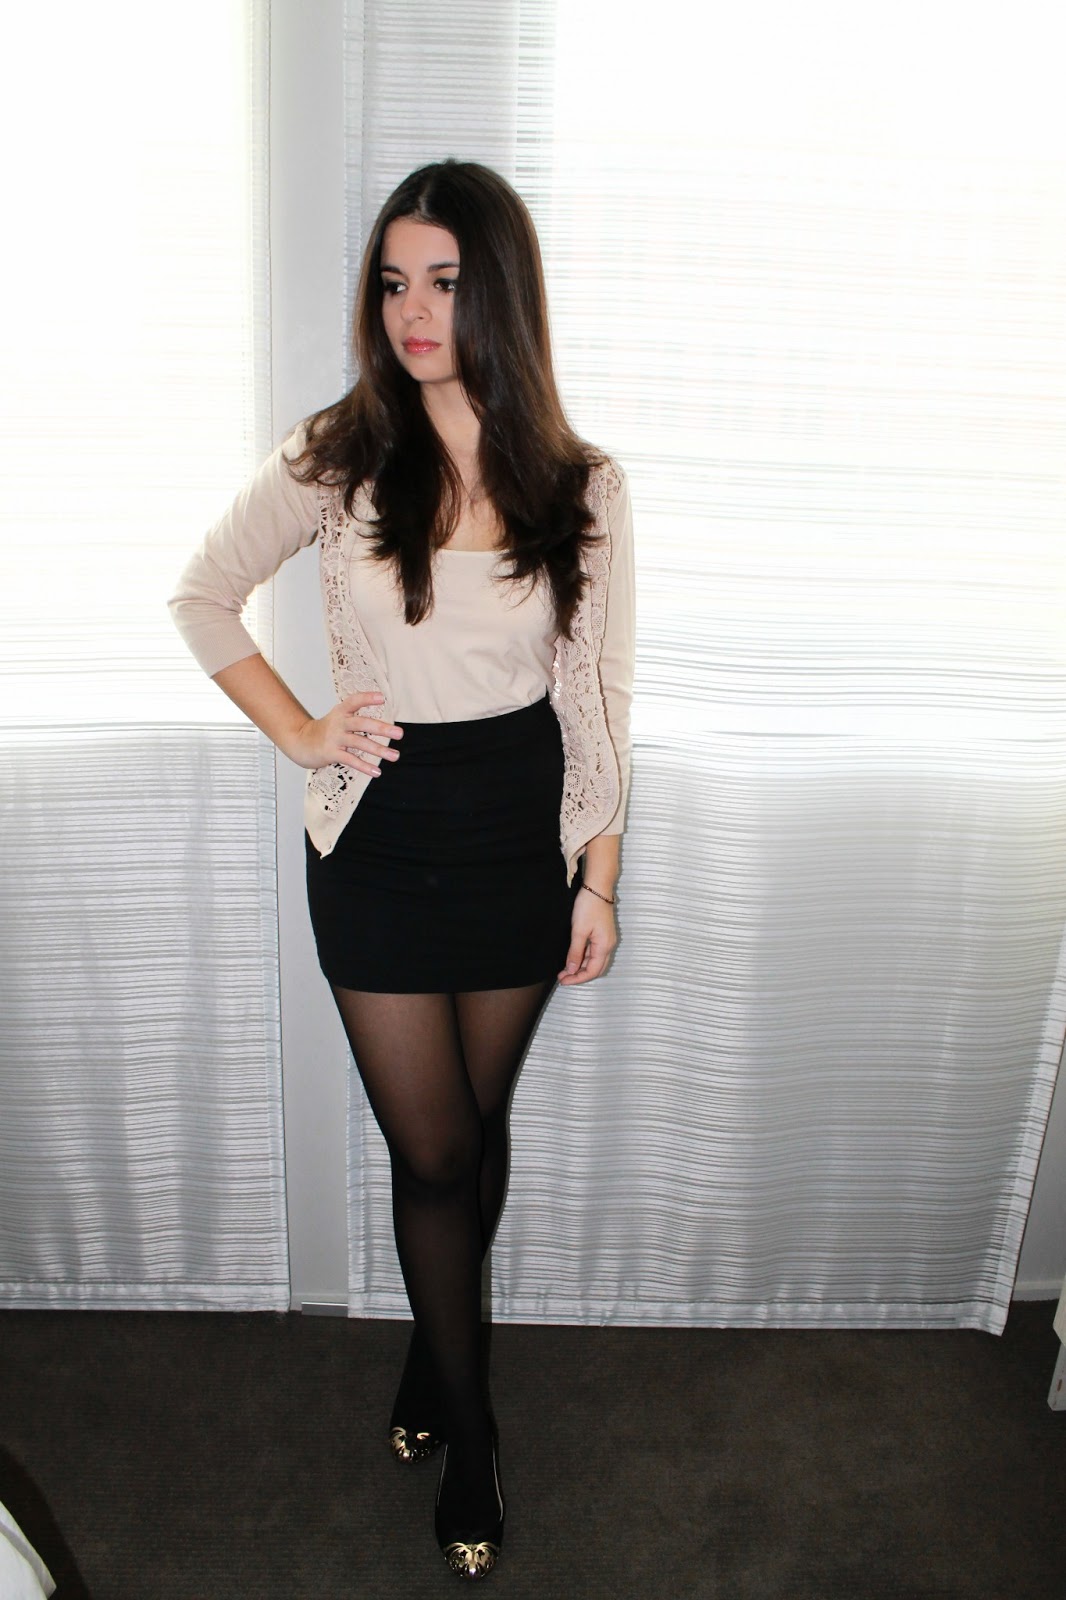 jana cova spreads her pussy caged pichunter #nn #youngteen #dressed #formal #skirt #brunette